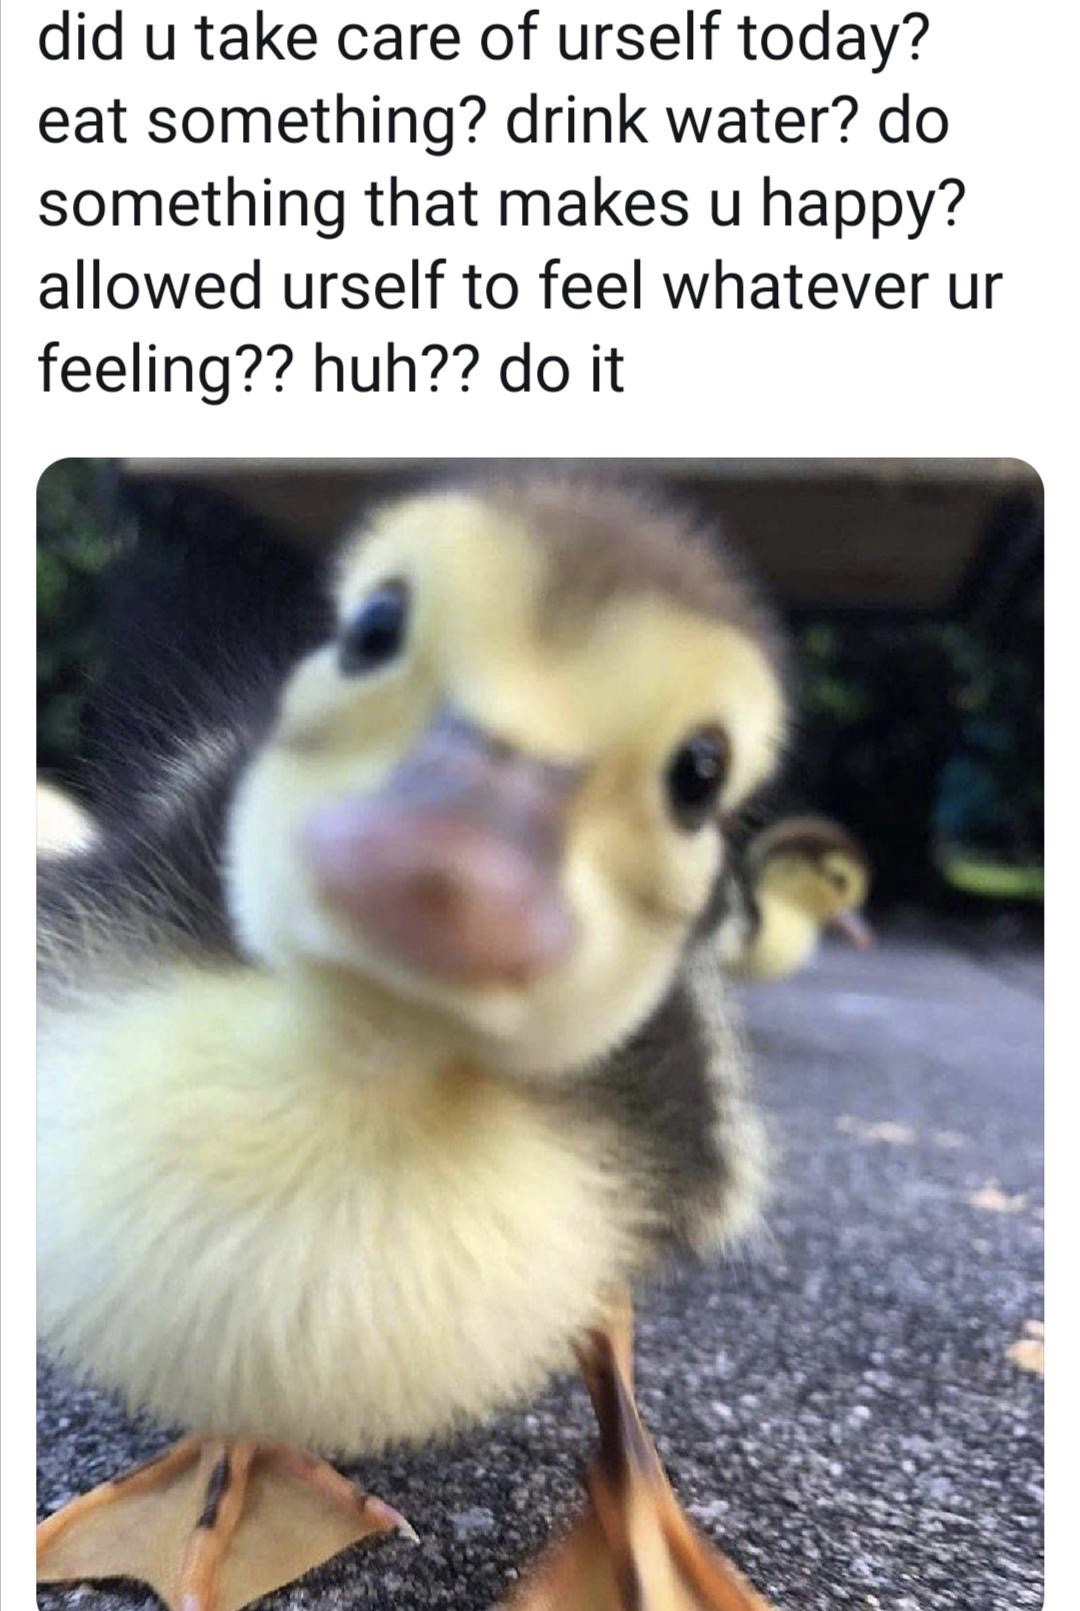 Duck - did u take care of urself today? eat something? drink water? do something that makes u happy? allowed urself to feel whatever ur feeling?? huh?? do it